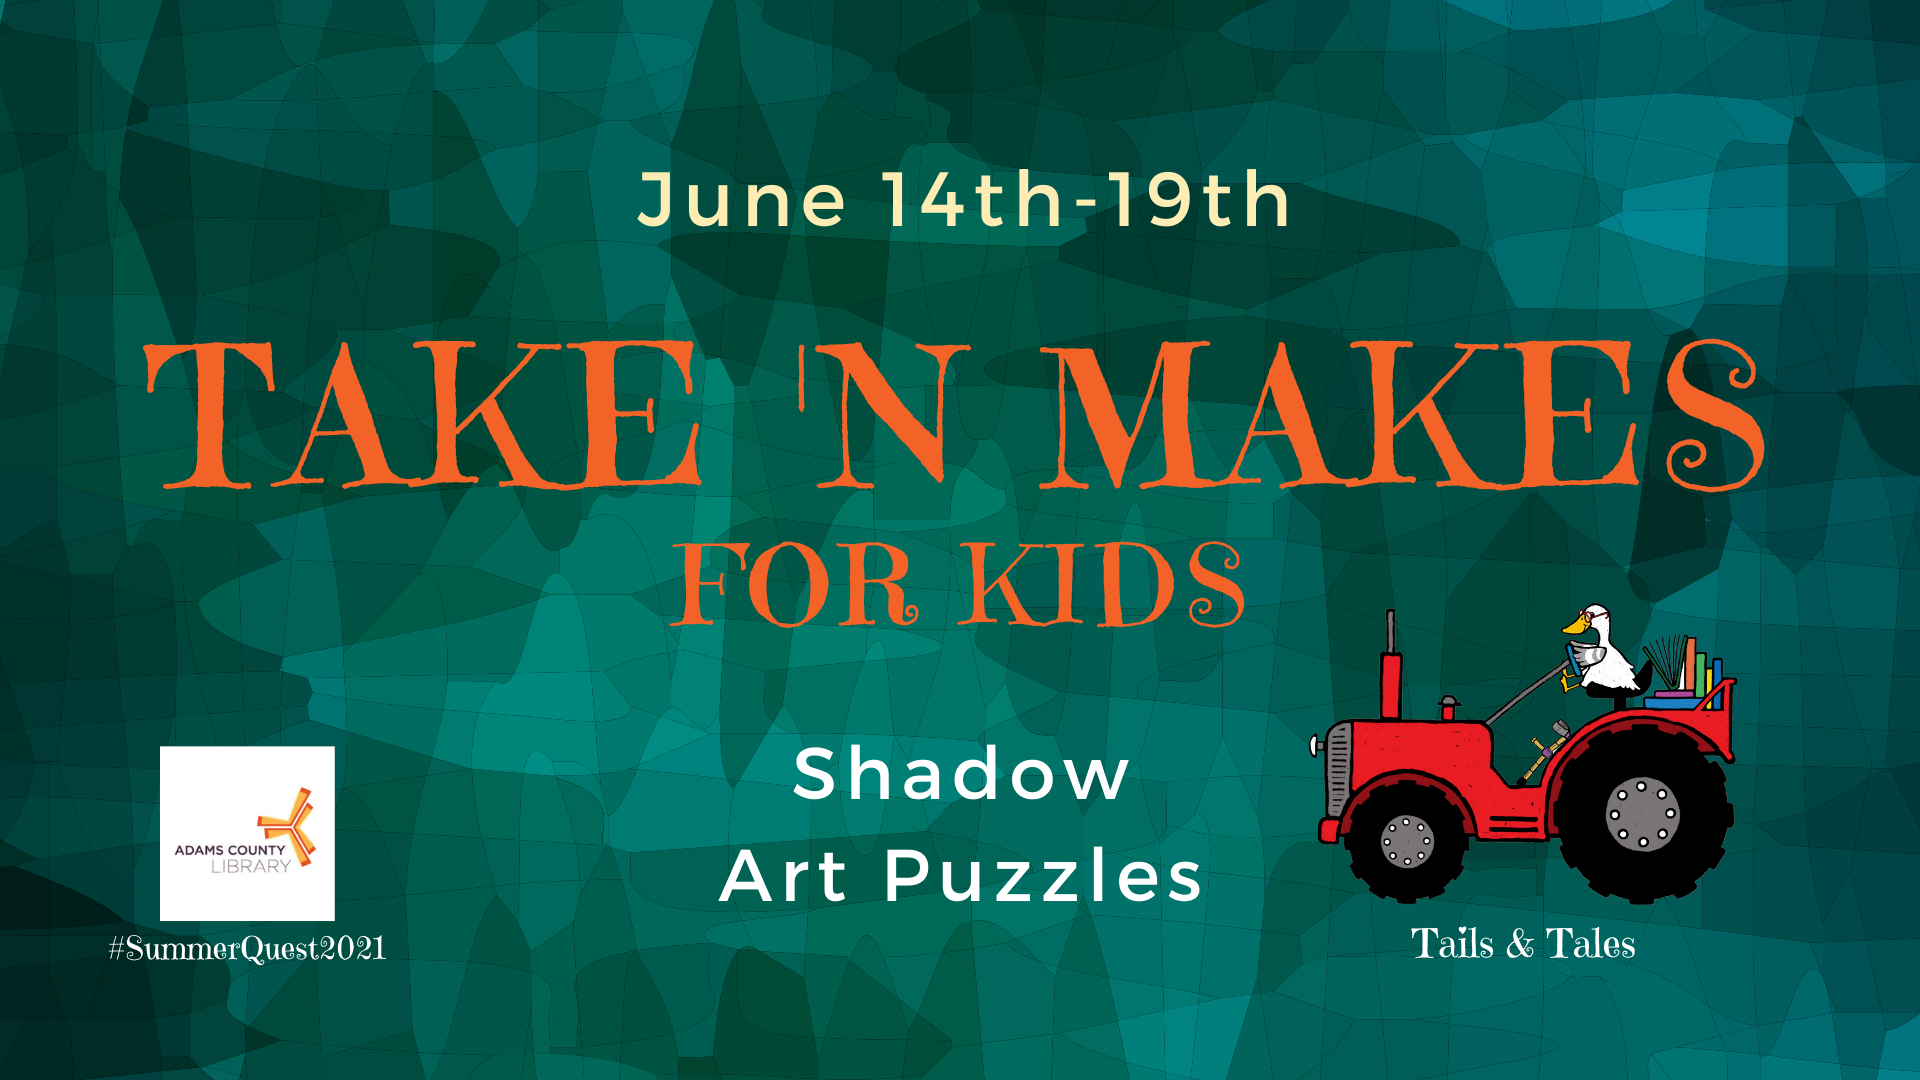 Pick up a Take n' Make for Kids from June 14th through June 19th. This week the project is Shadow Art Puzzles!